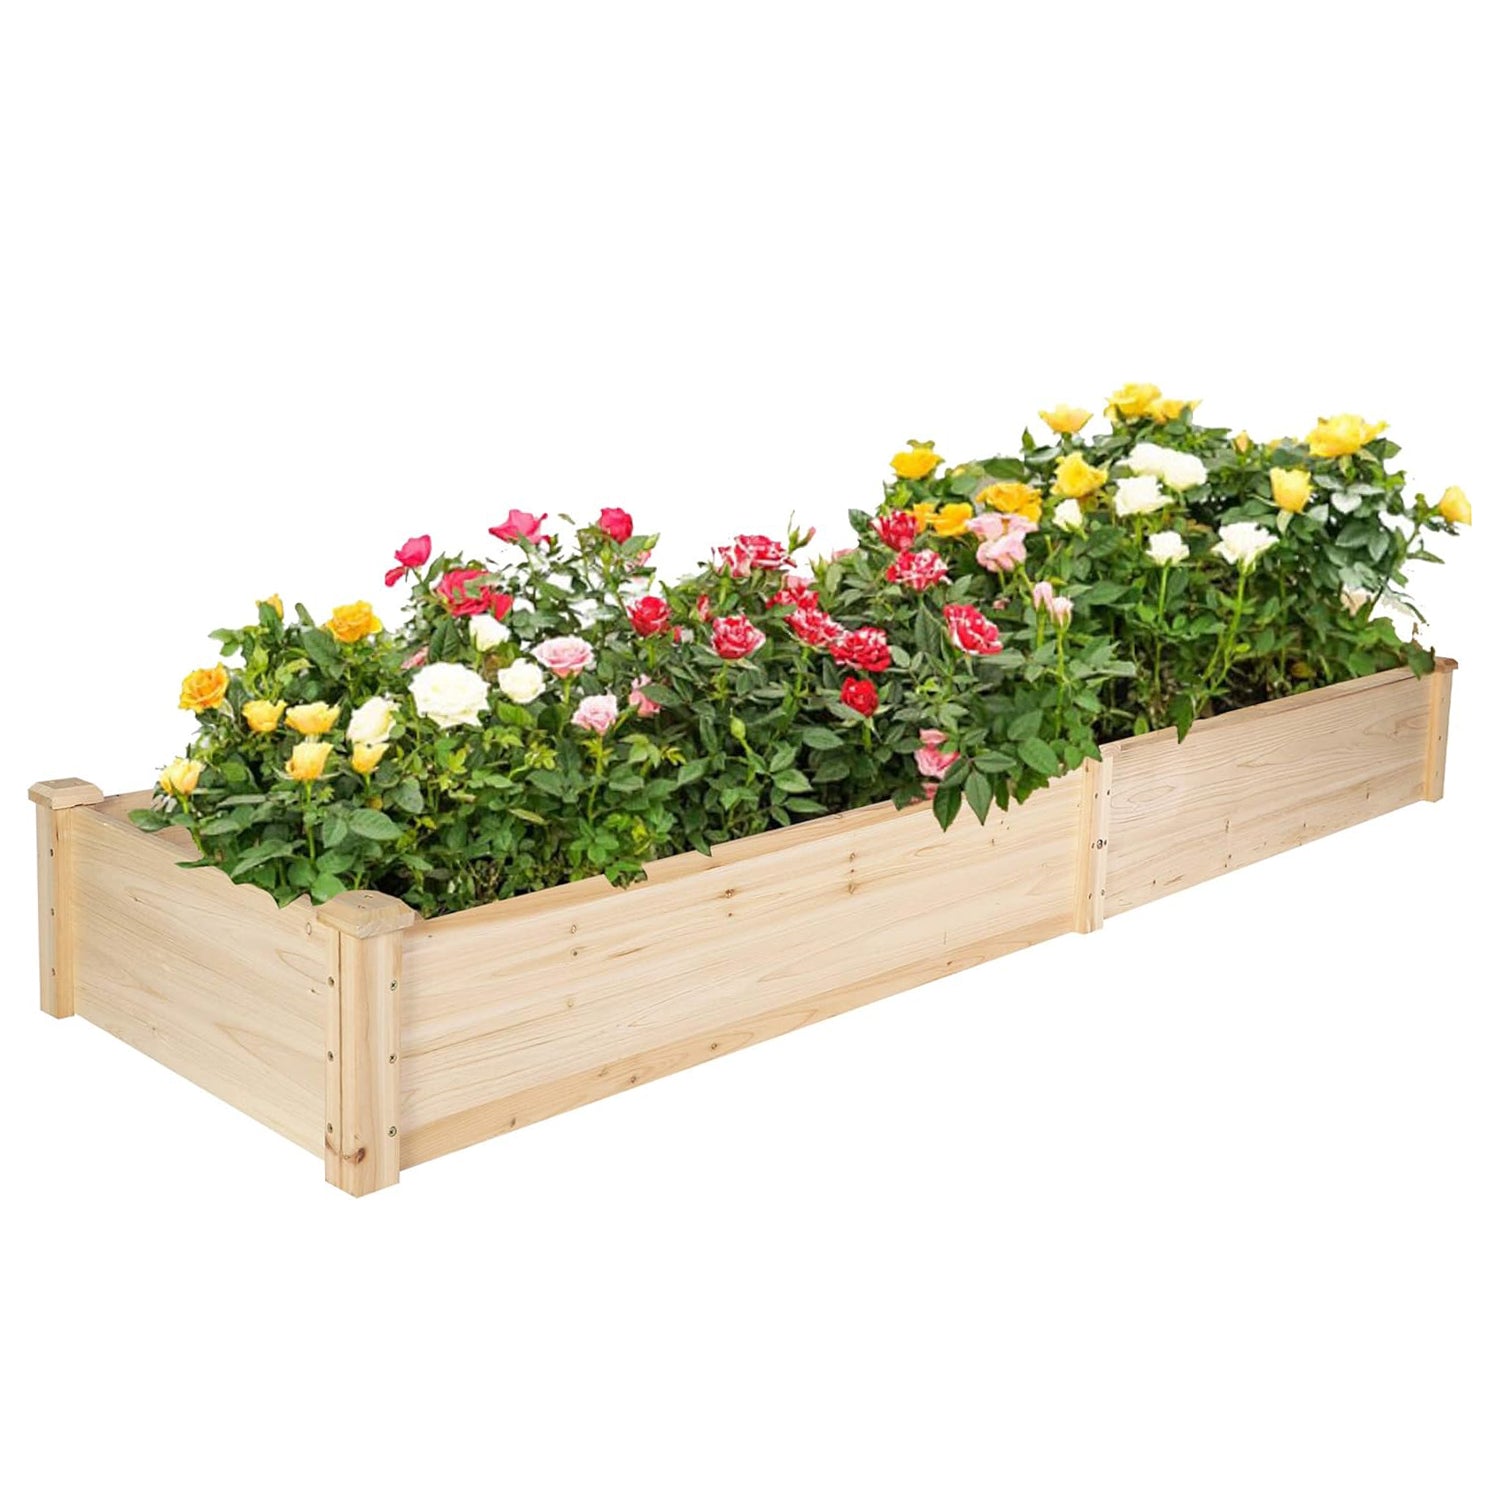 90"x22”x9” Raised Garden Bed Wooden Planter Box with 2 Separate Planting Space